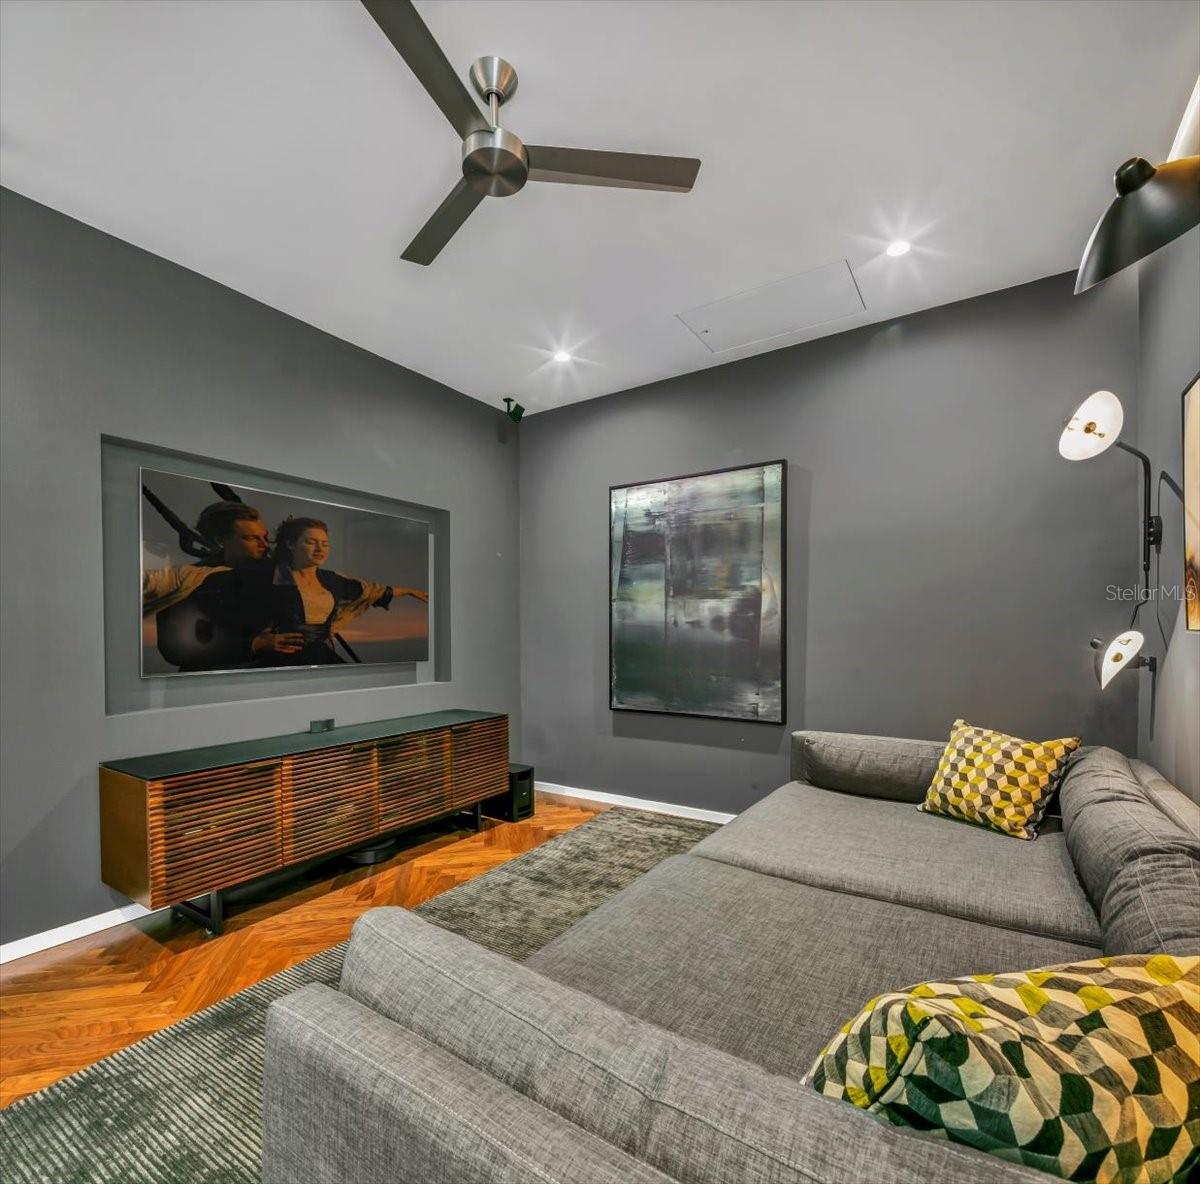 Utilized as a theater-den, the third bedroom will benefit many different tastes and styles.